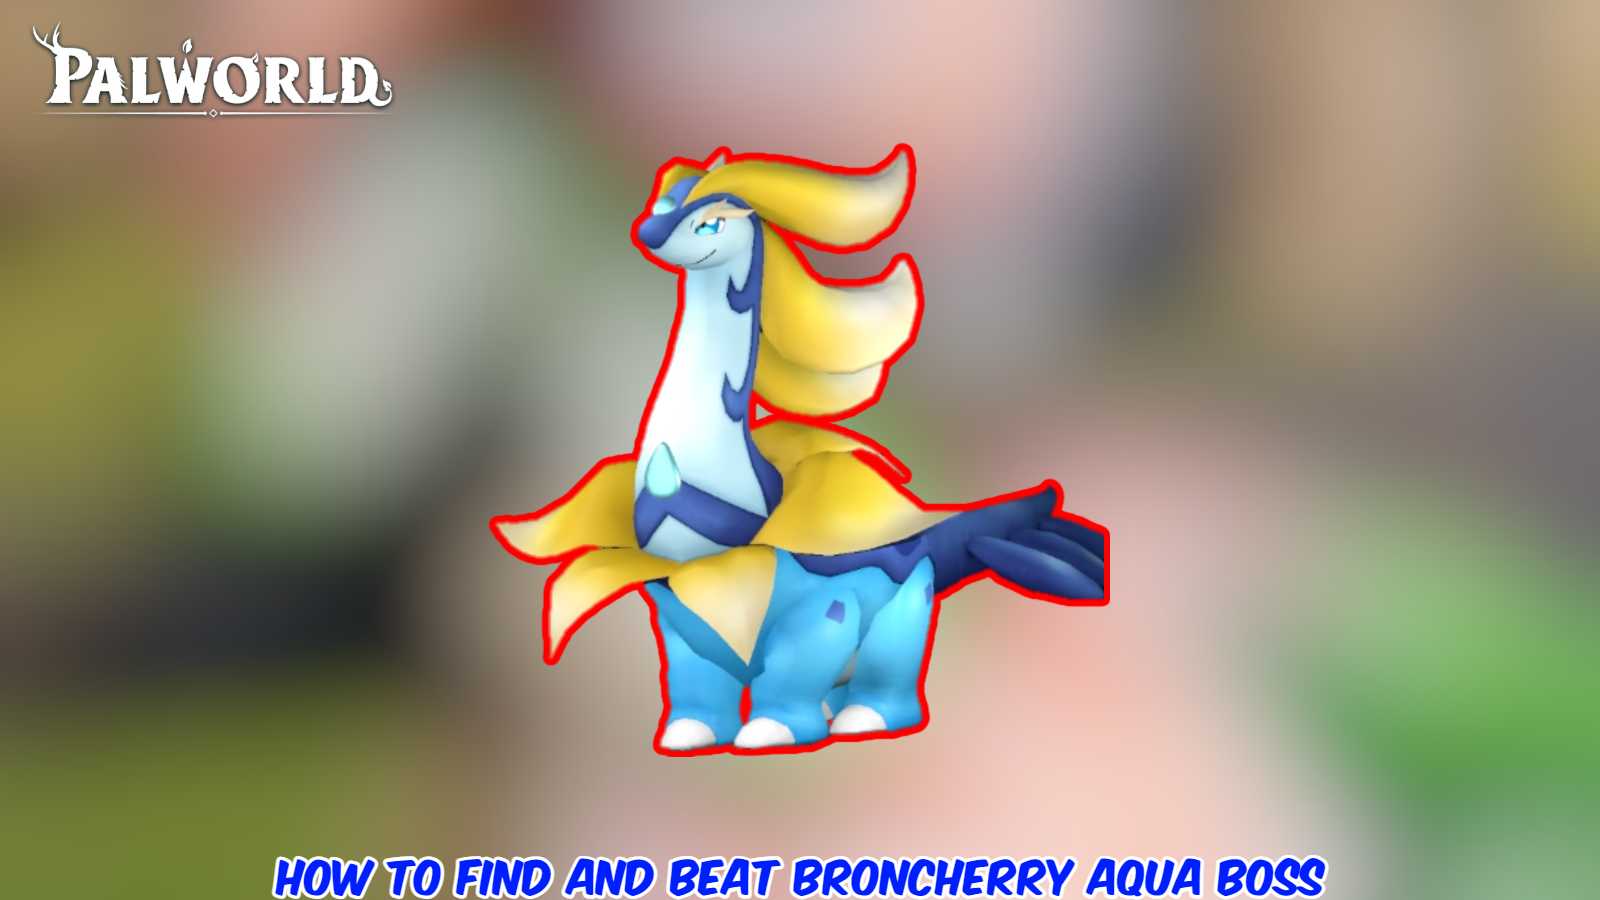 Palworld: How To Find and Beat Broncherry Aqua Boss